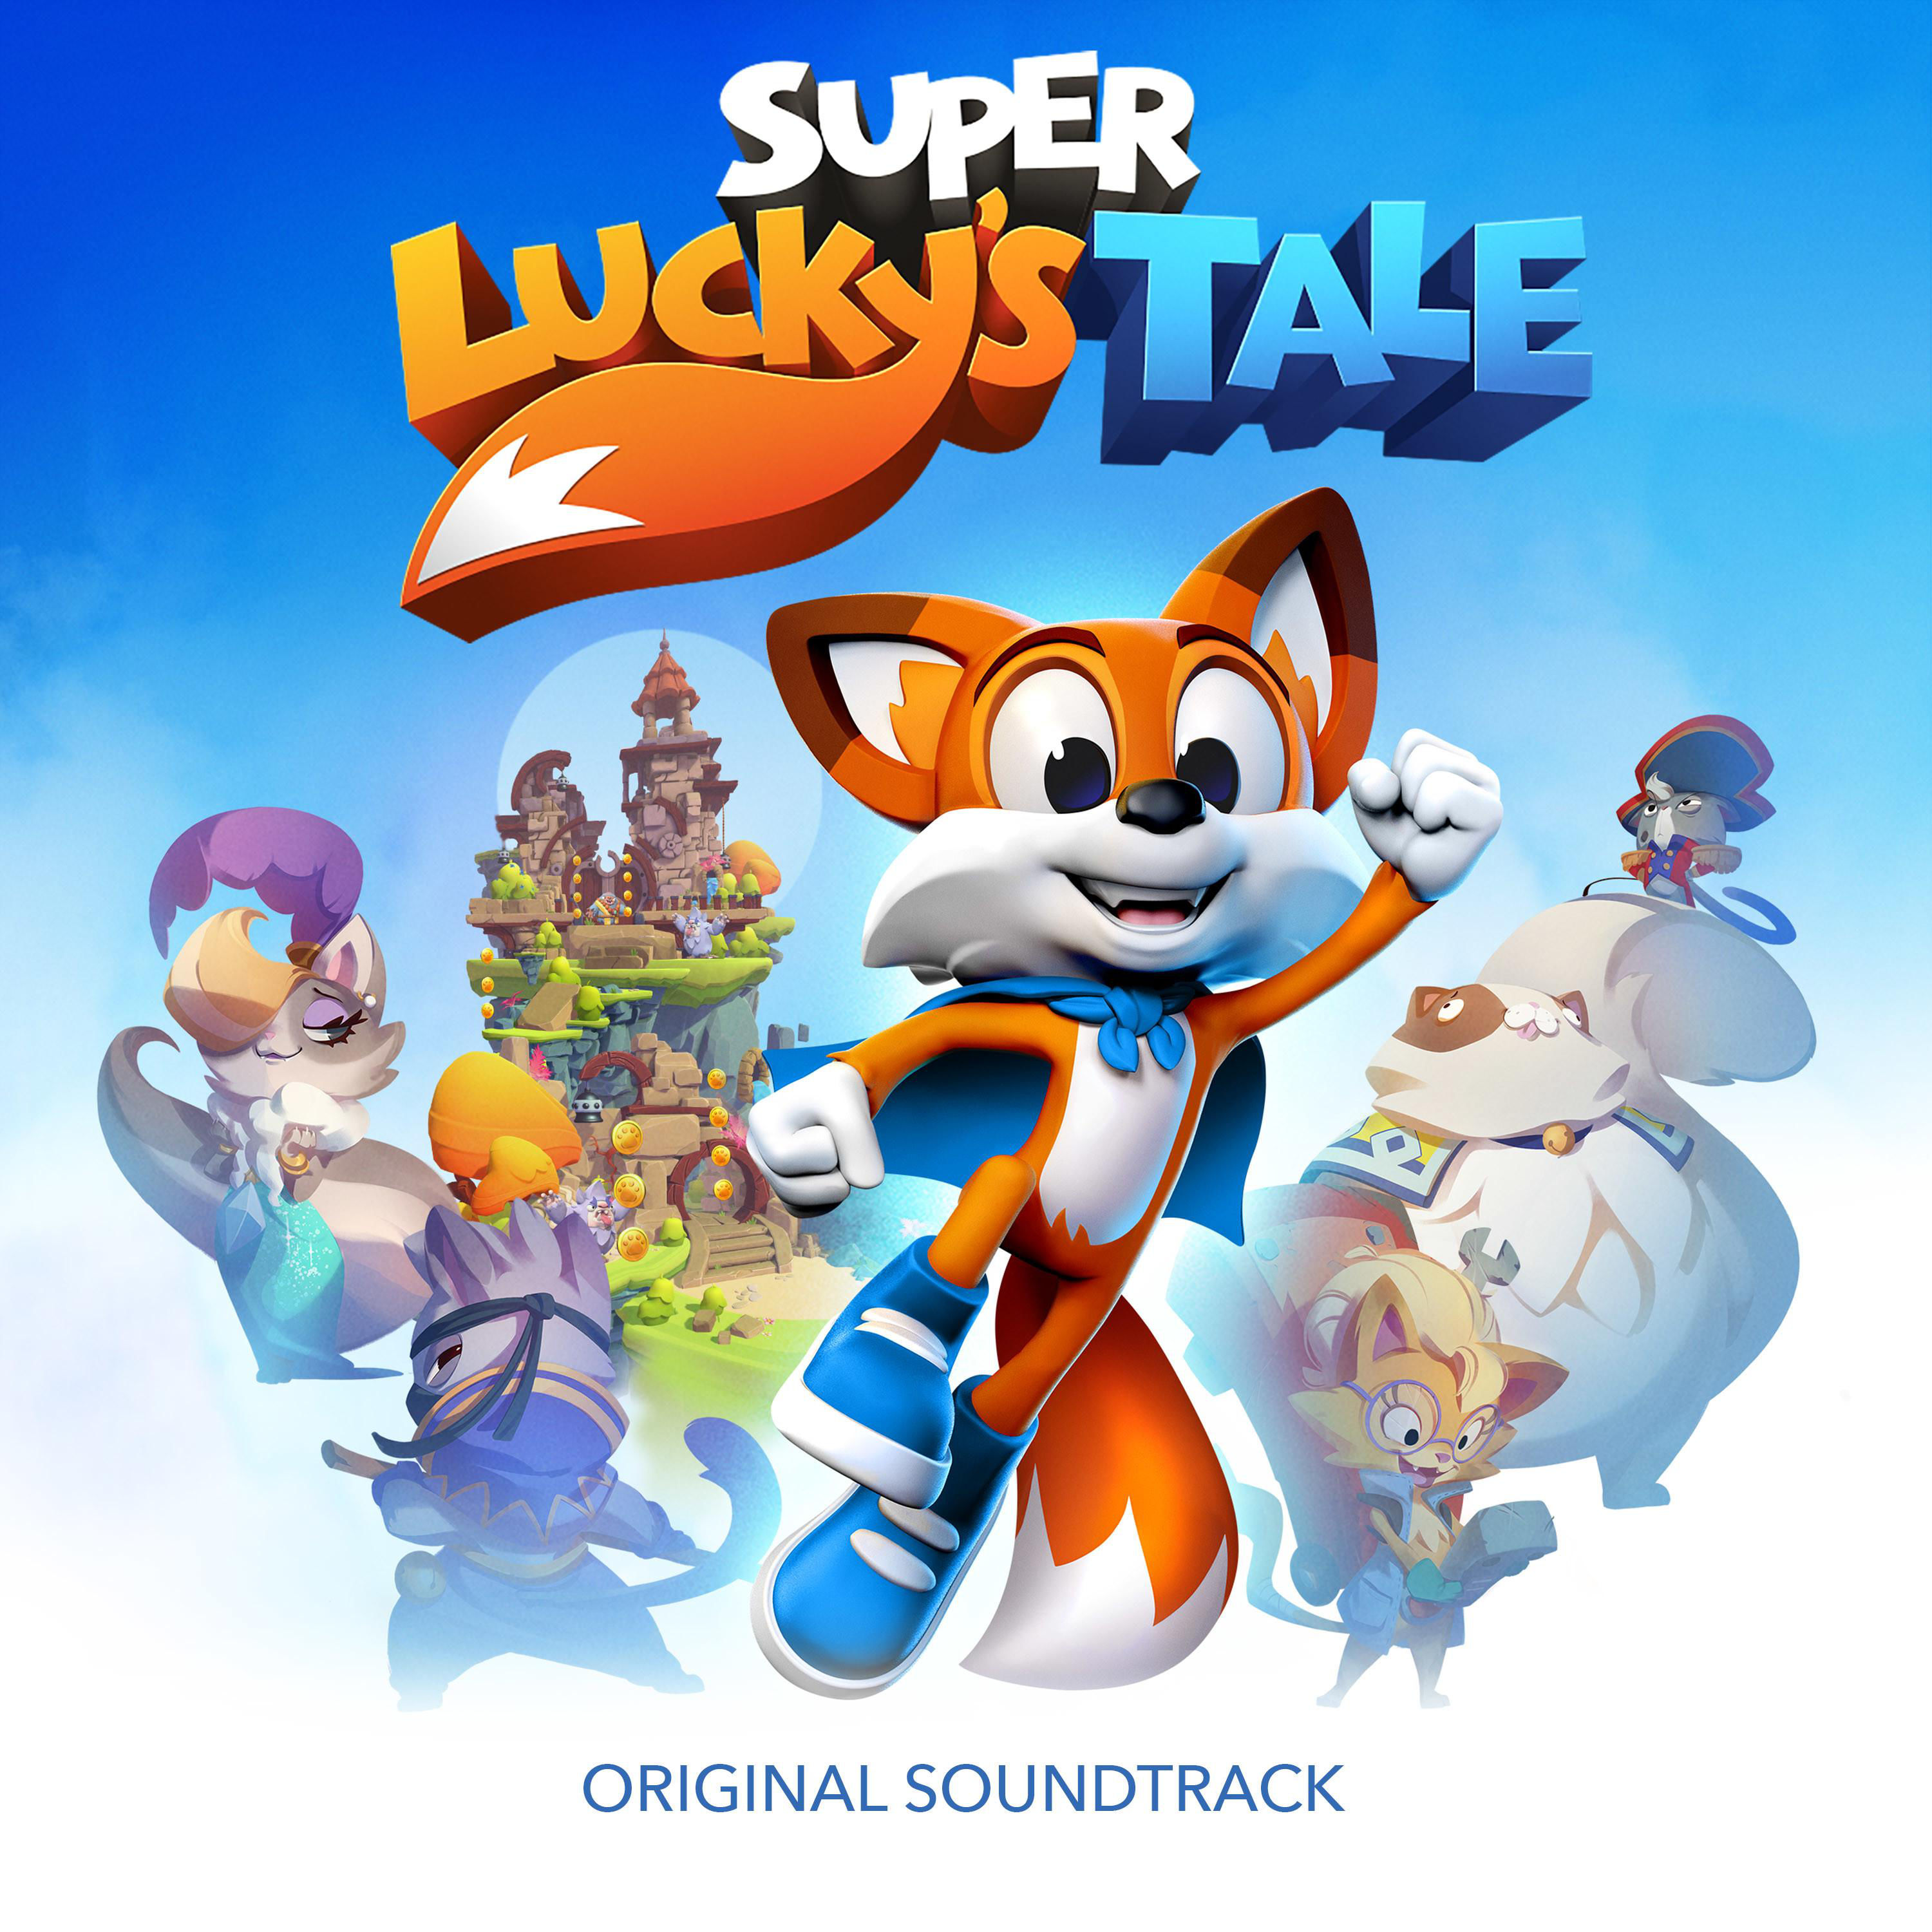 New lucky tale. New super Lucky's Tale. New super Lucky Tale. New super Lucky's Tale отличия. Super Lucky's Tale icon.